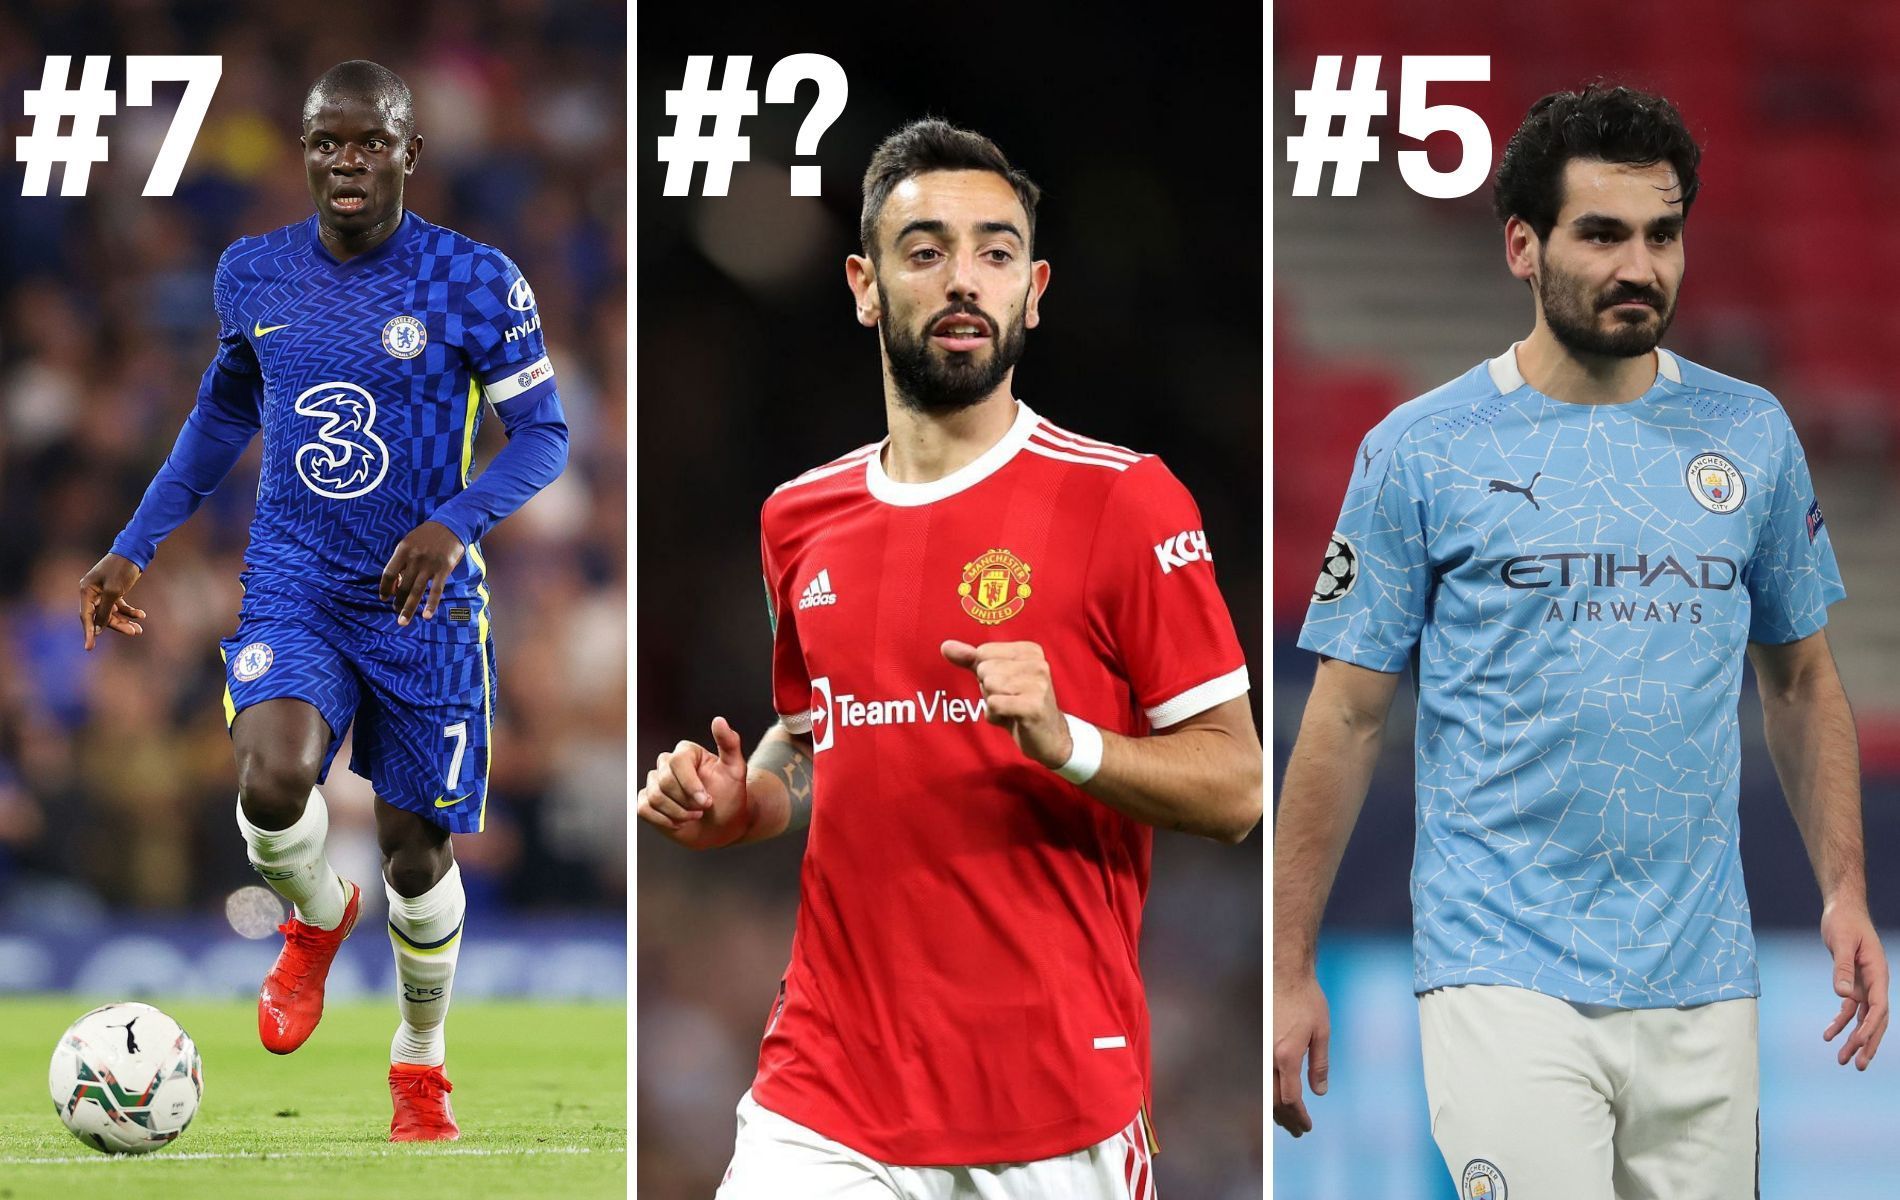 The Premier League possesses some world-class midfielders right now